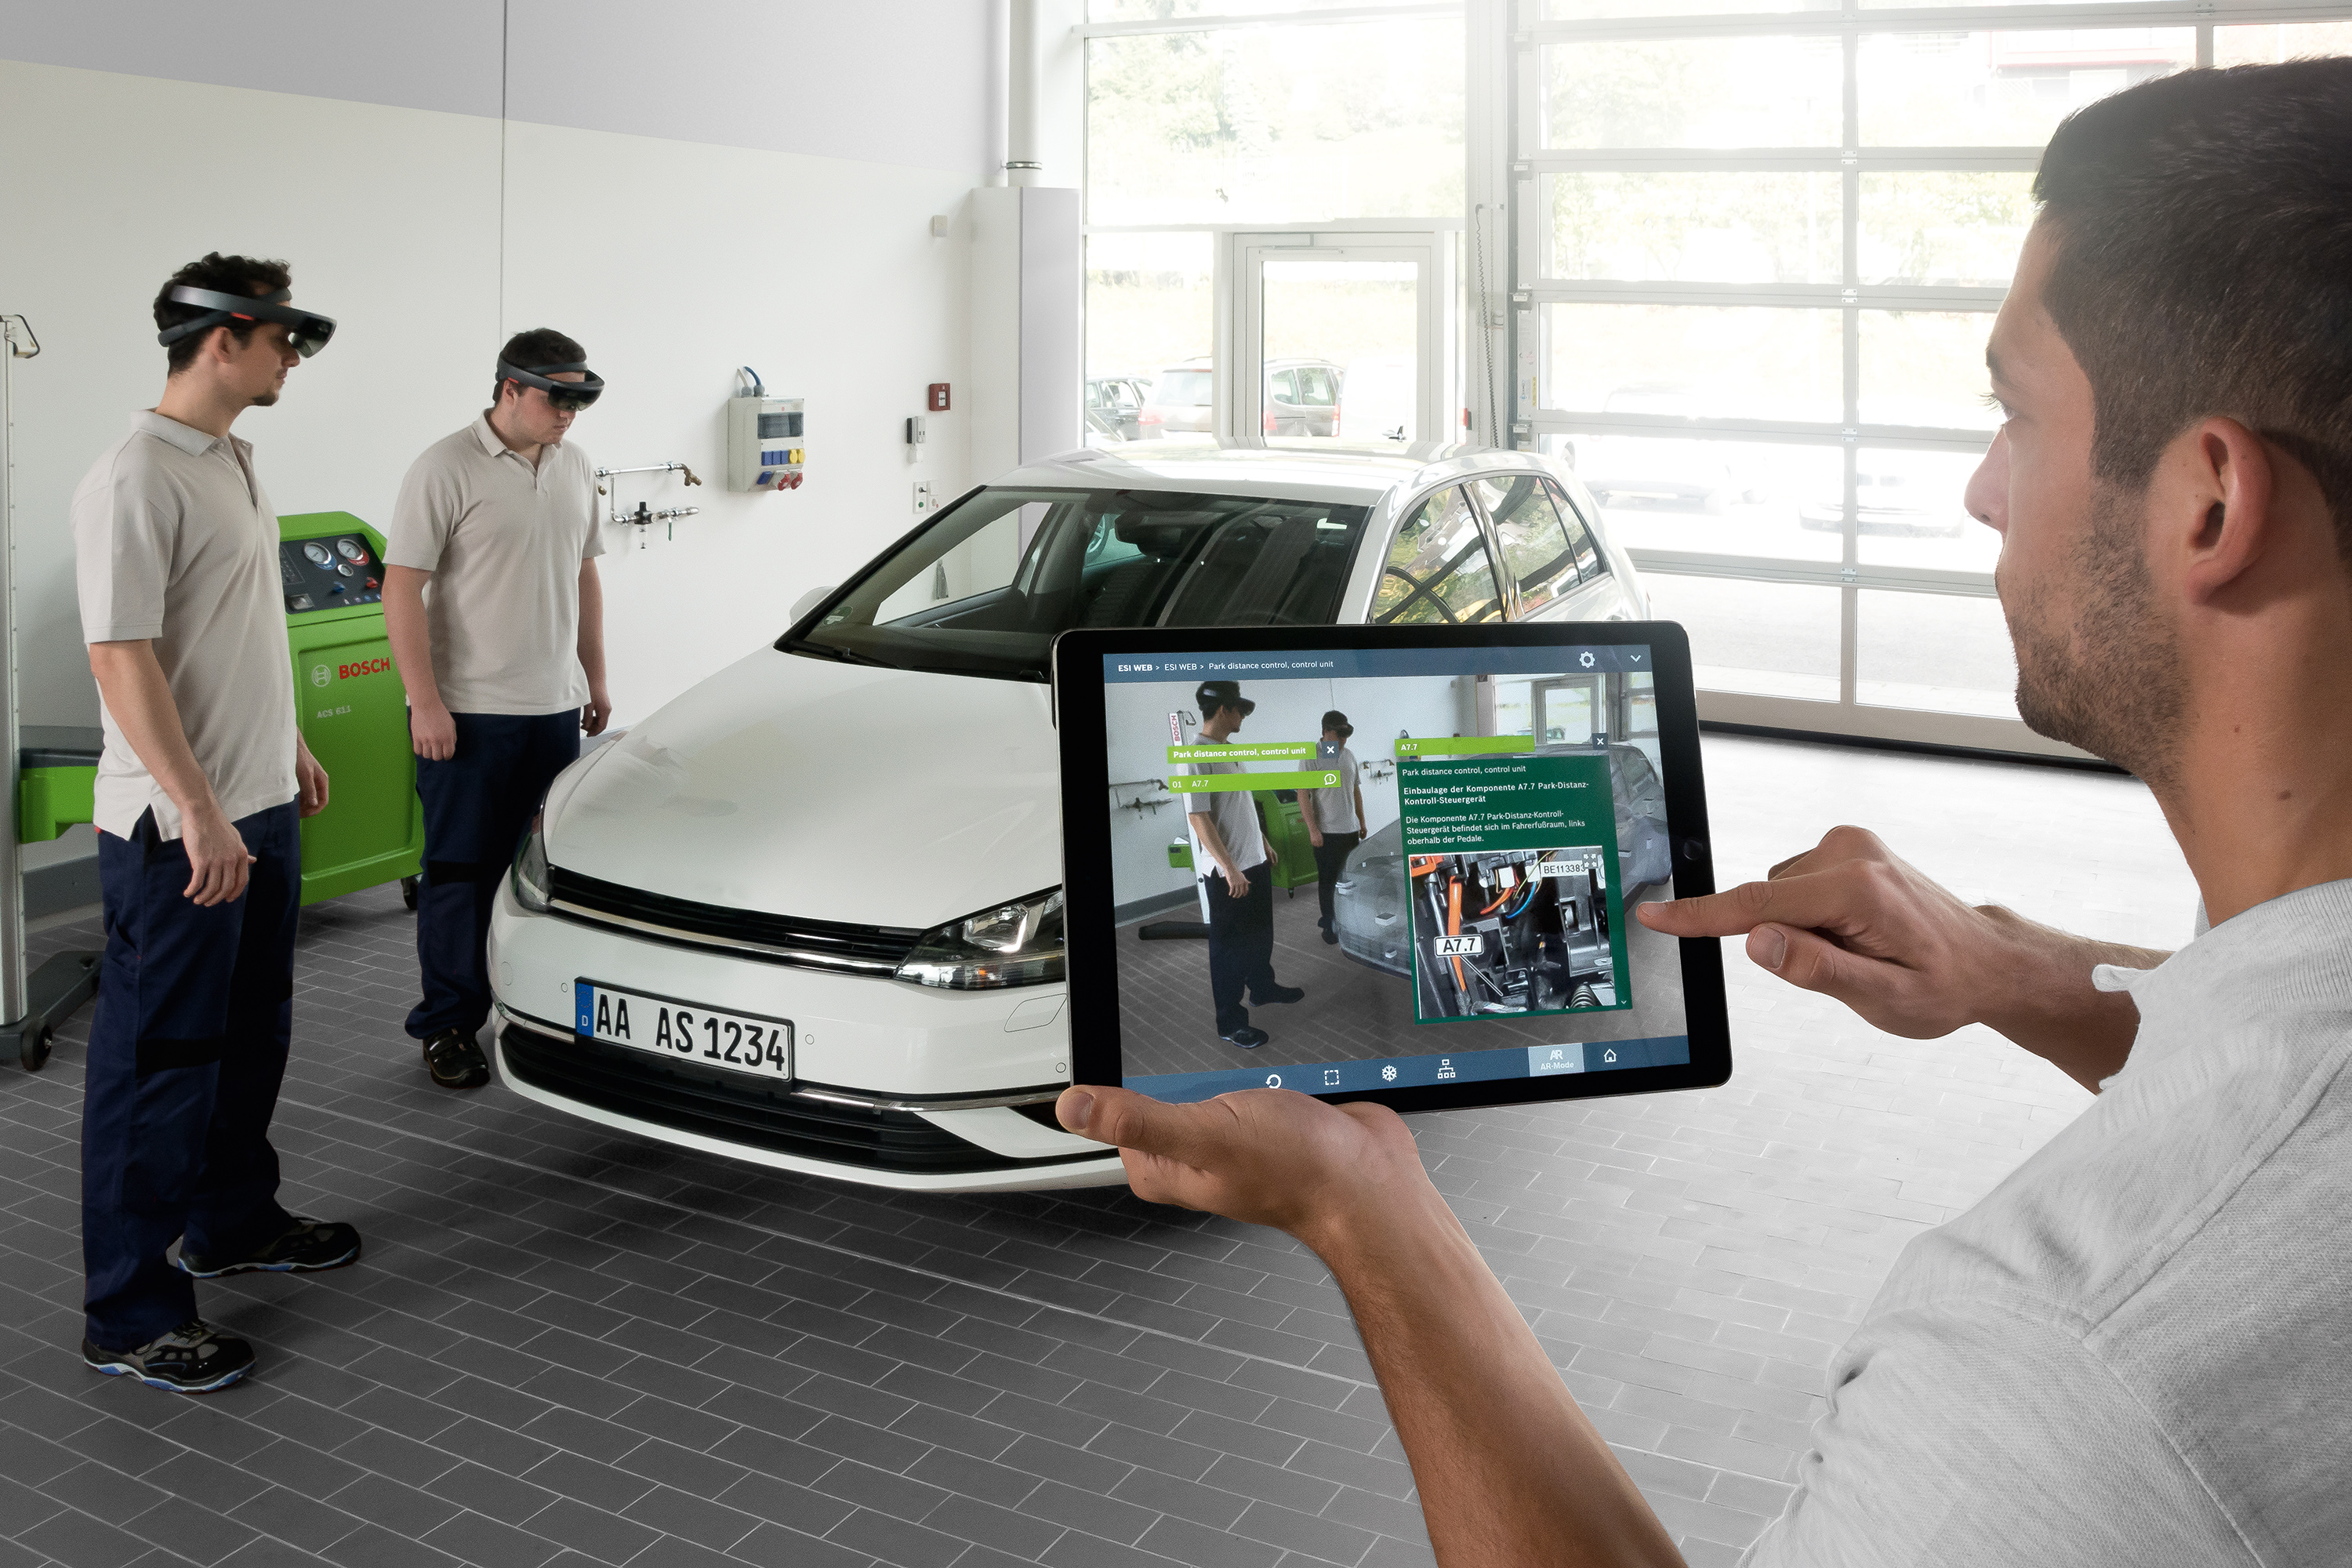 Full view and comprehension for technical service trainings: Bosch trains automotive mechatronics with innovative Augmented Reality technology